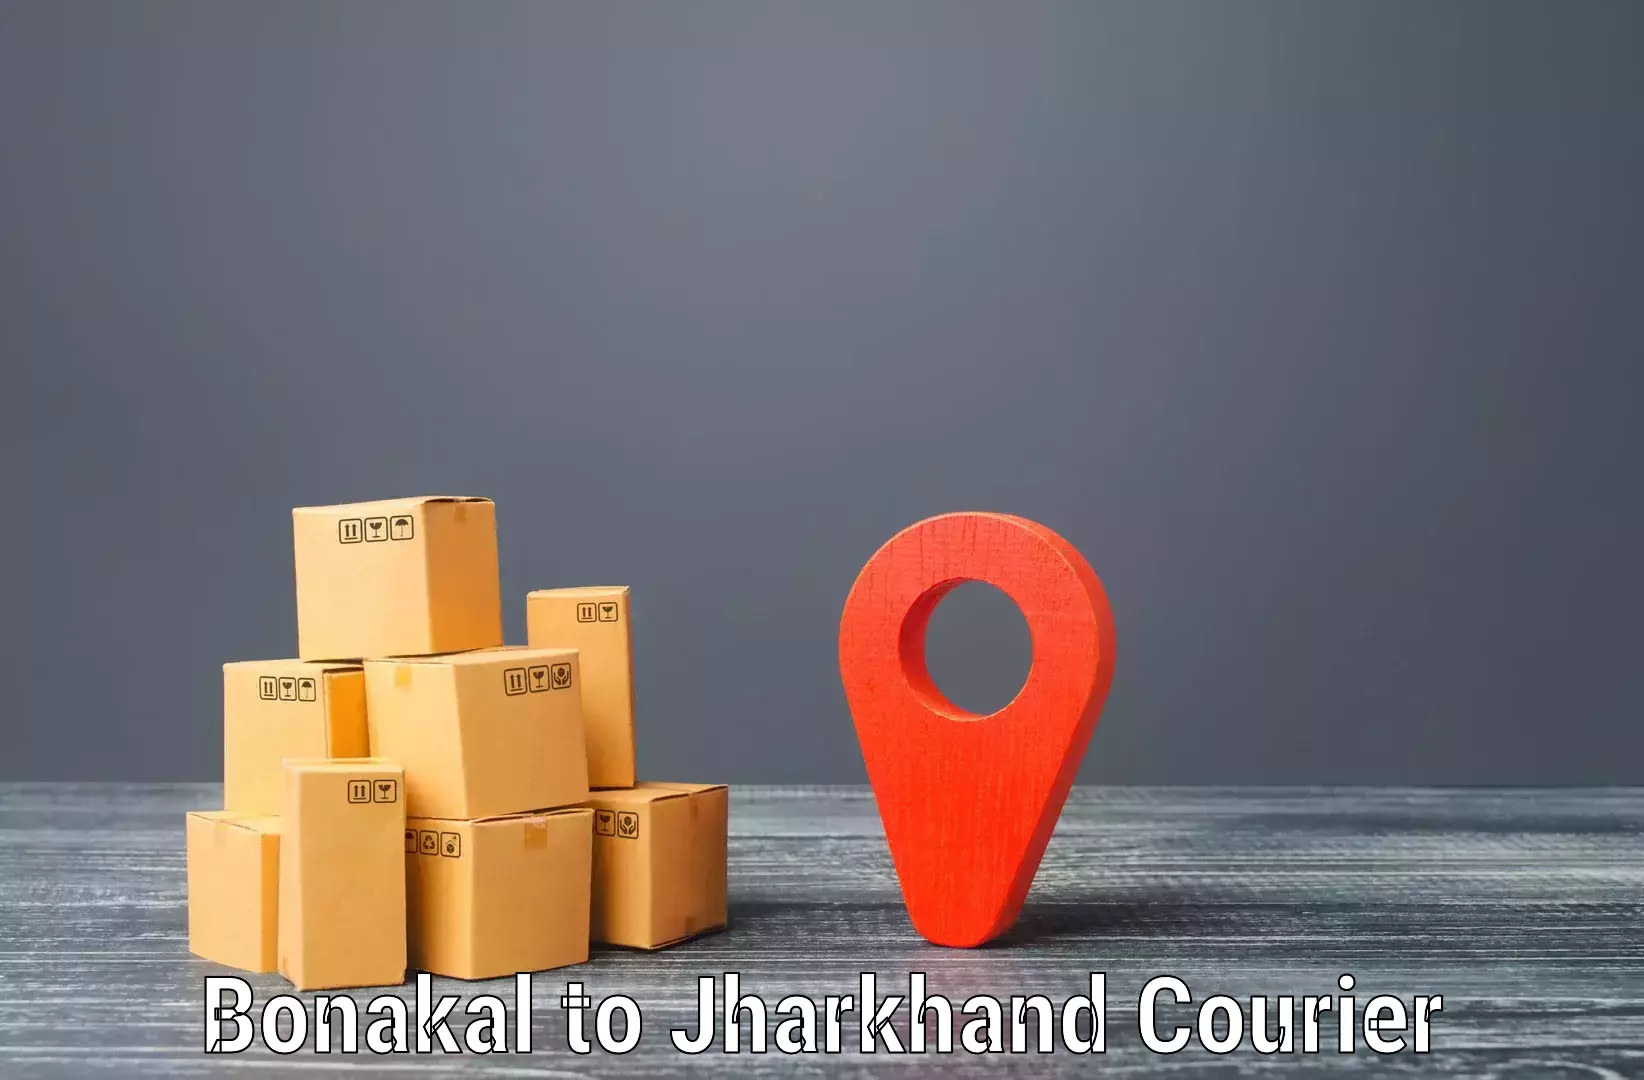 Global freight services Bonakal to Chaibasa